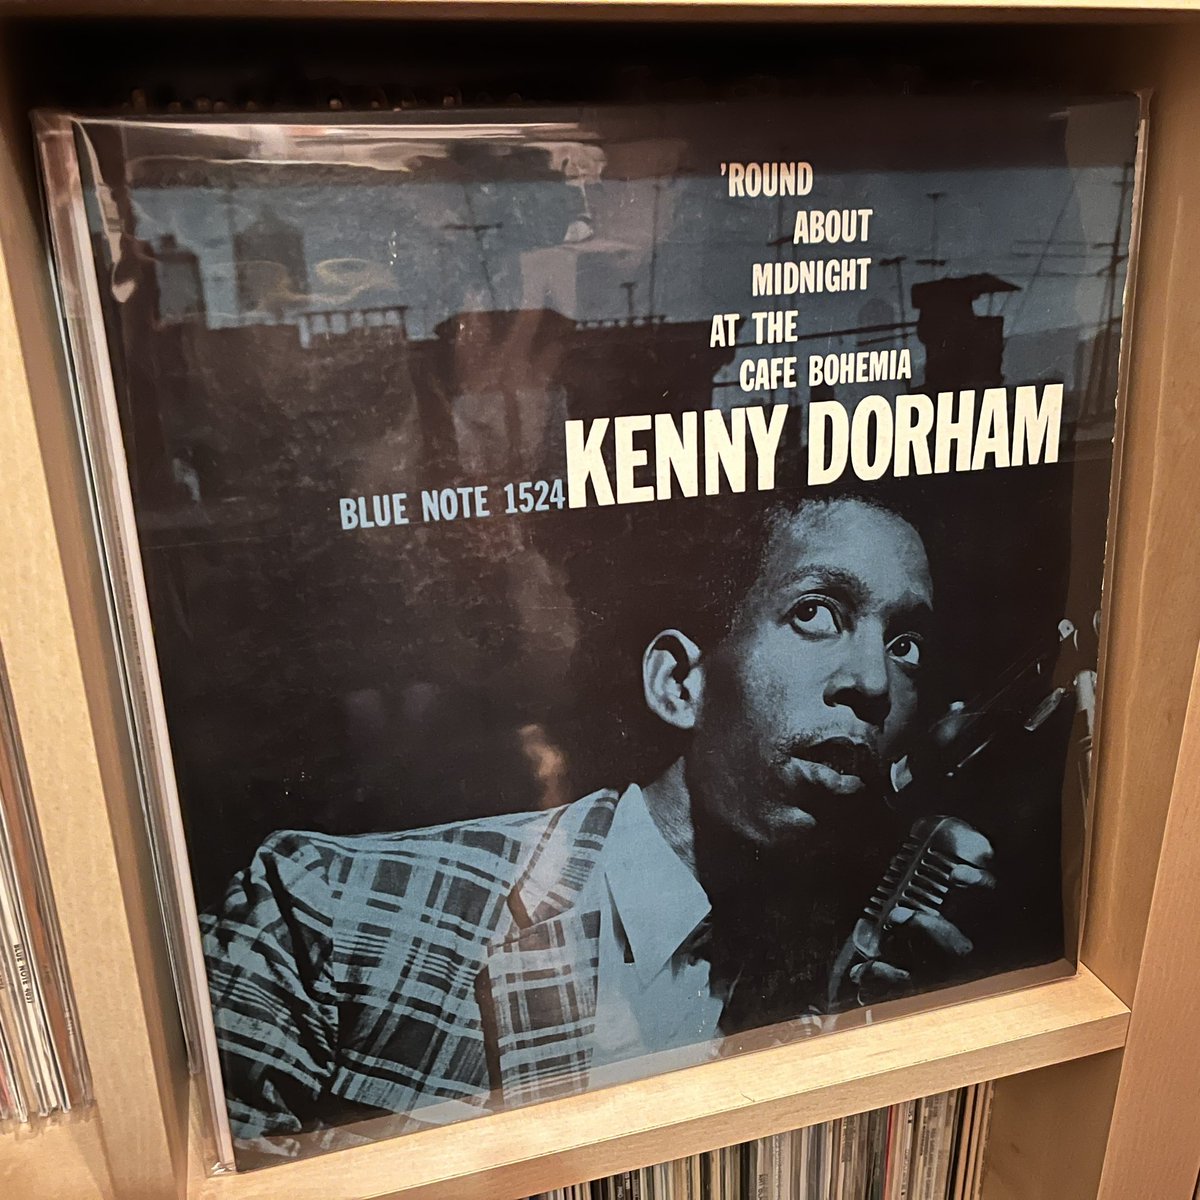 #NowPlaying #jazz KENNY DORHAM ROUND ABOUT MIDNIGHT AT THE CAFE BOHEMIA ケニードーハム名盤◎